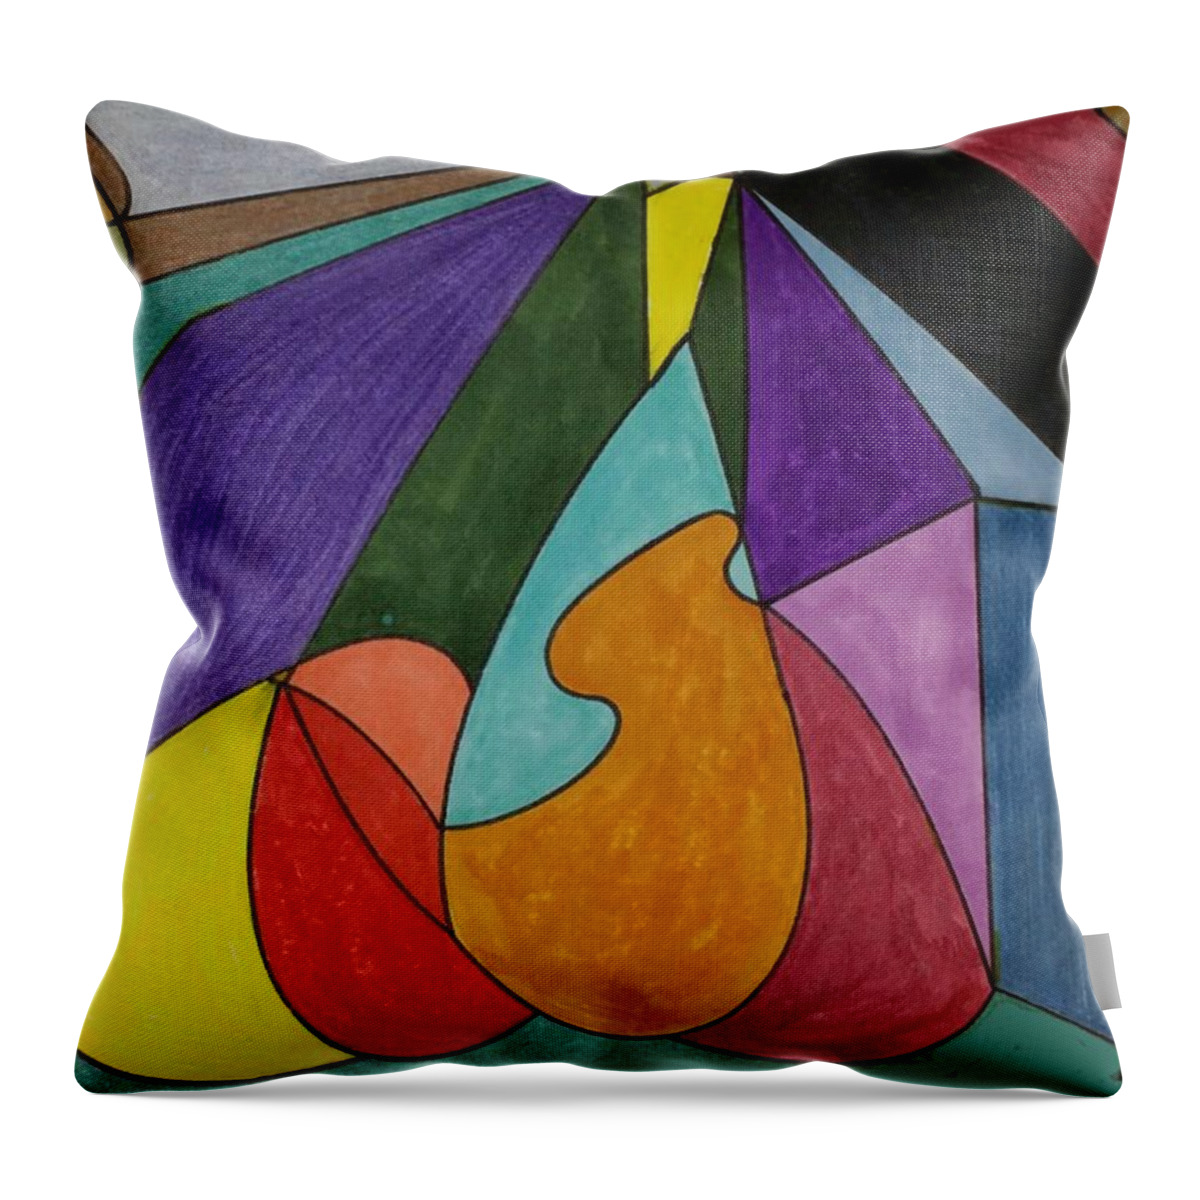 Geometric Art Throw Pillow featuring the glass art Dream 96 by S S-ray